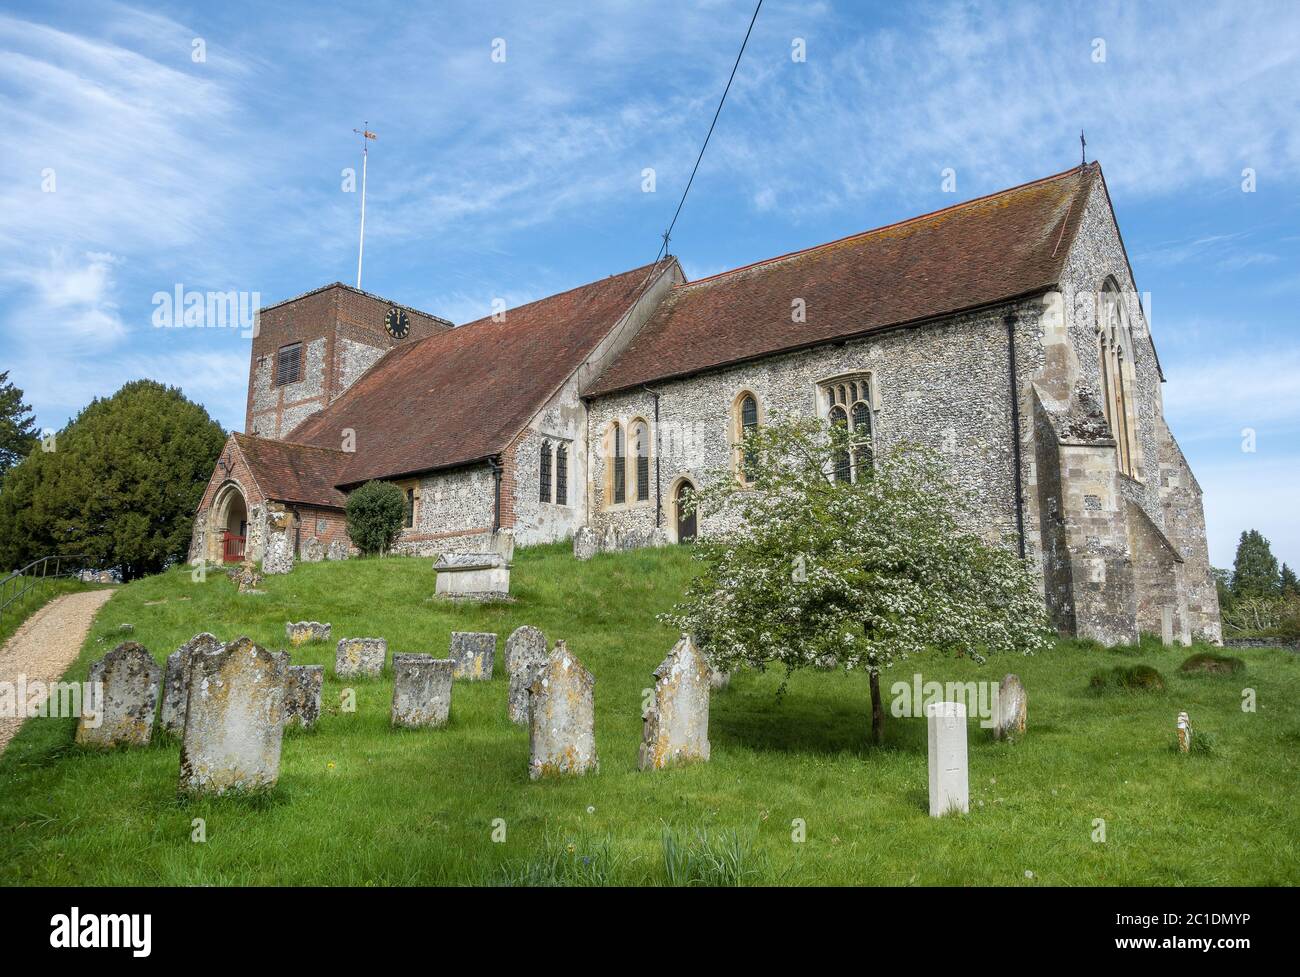 Church of St. Michael & All Angels in the picturesque village of Cheriton, England, UK Stock Photo